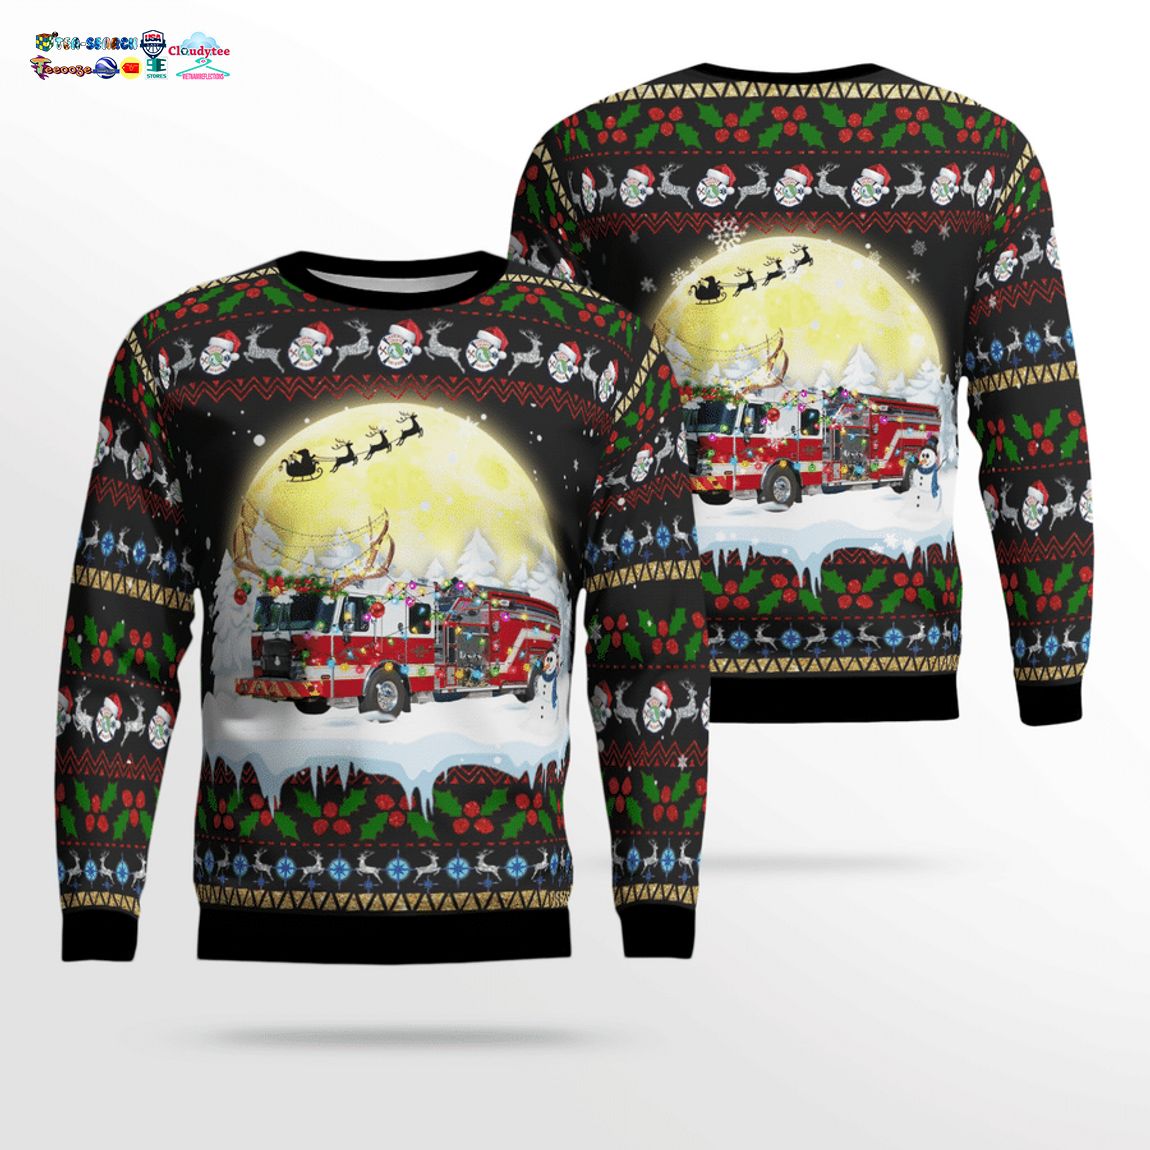 Florida Charlotte County Fire Department 3D Christmas Sweater - Nice photo dude